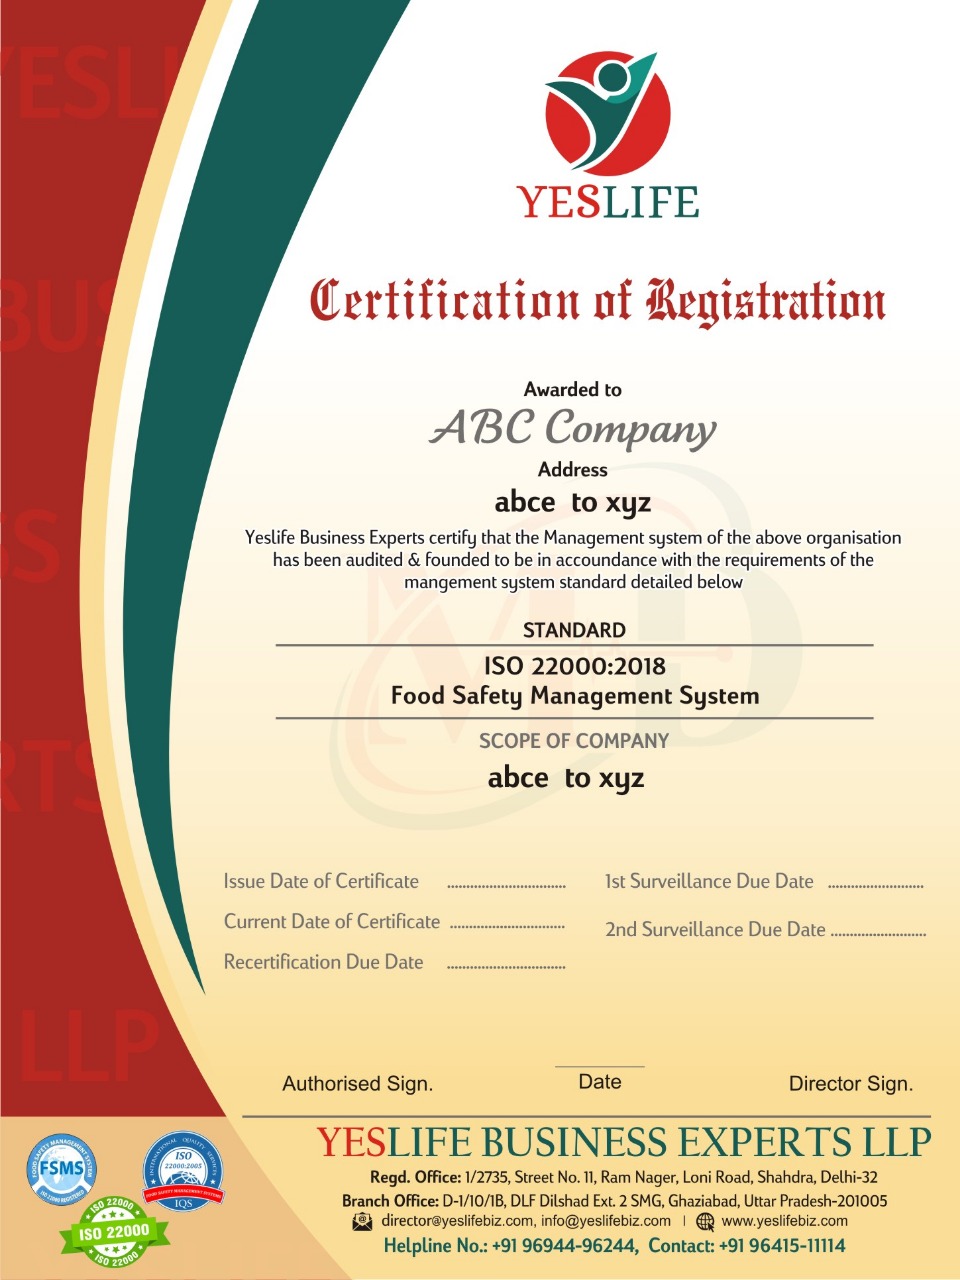 IS Consultancy - ISO 9001:2015 Certification